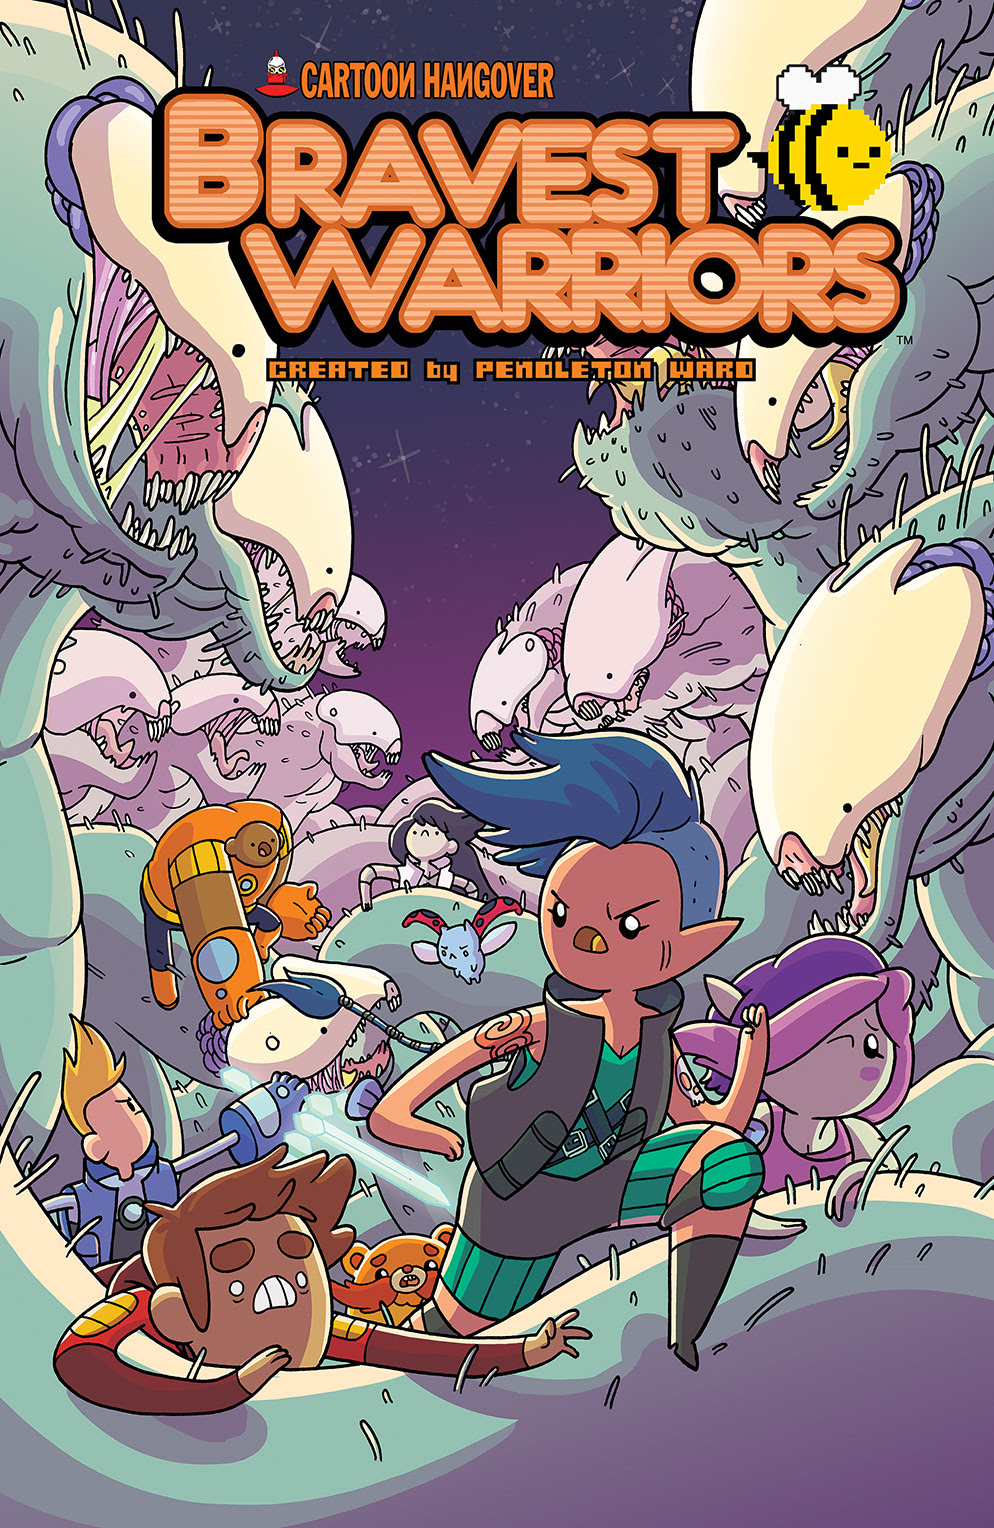 BRAVEST WARRIORS #27 Cover A by Ian McGinty